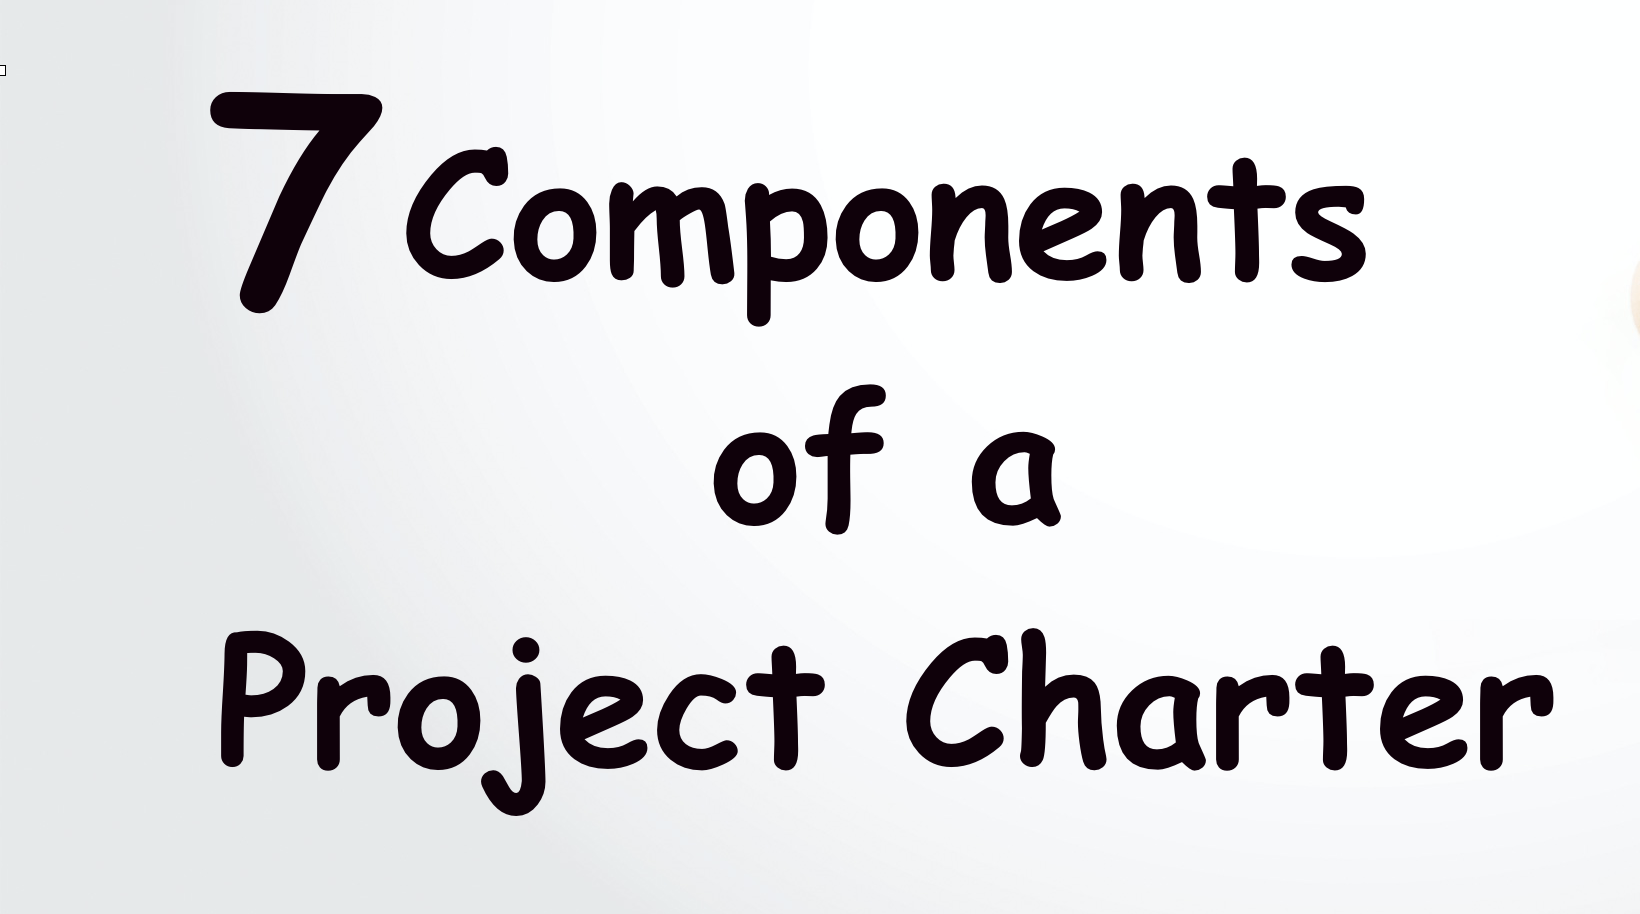 7 Components of a Project Charter